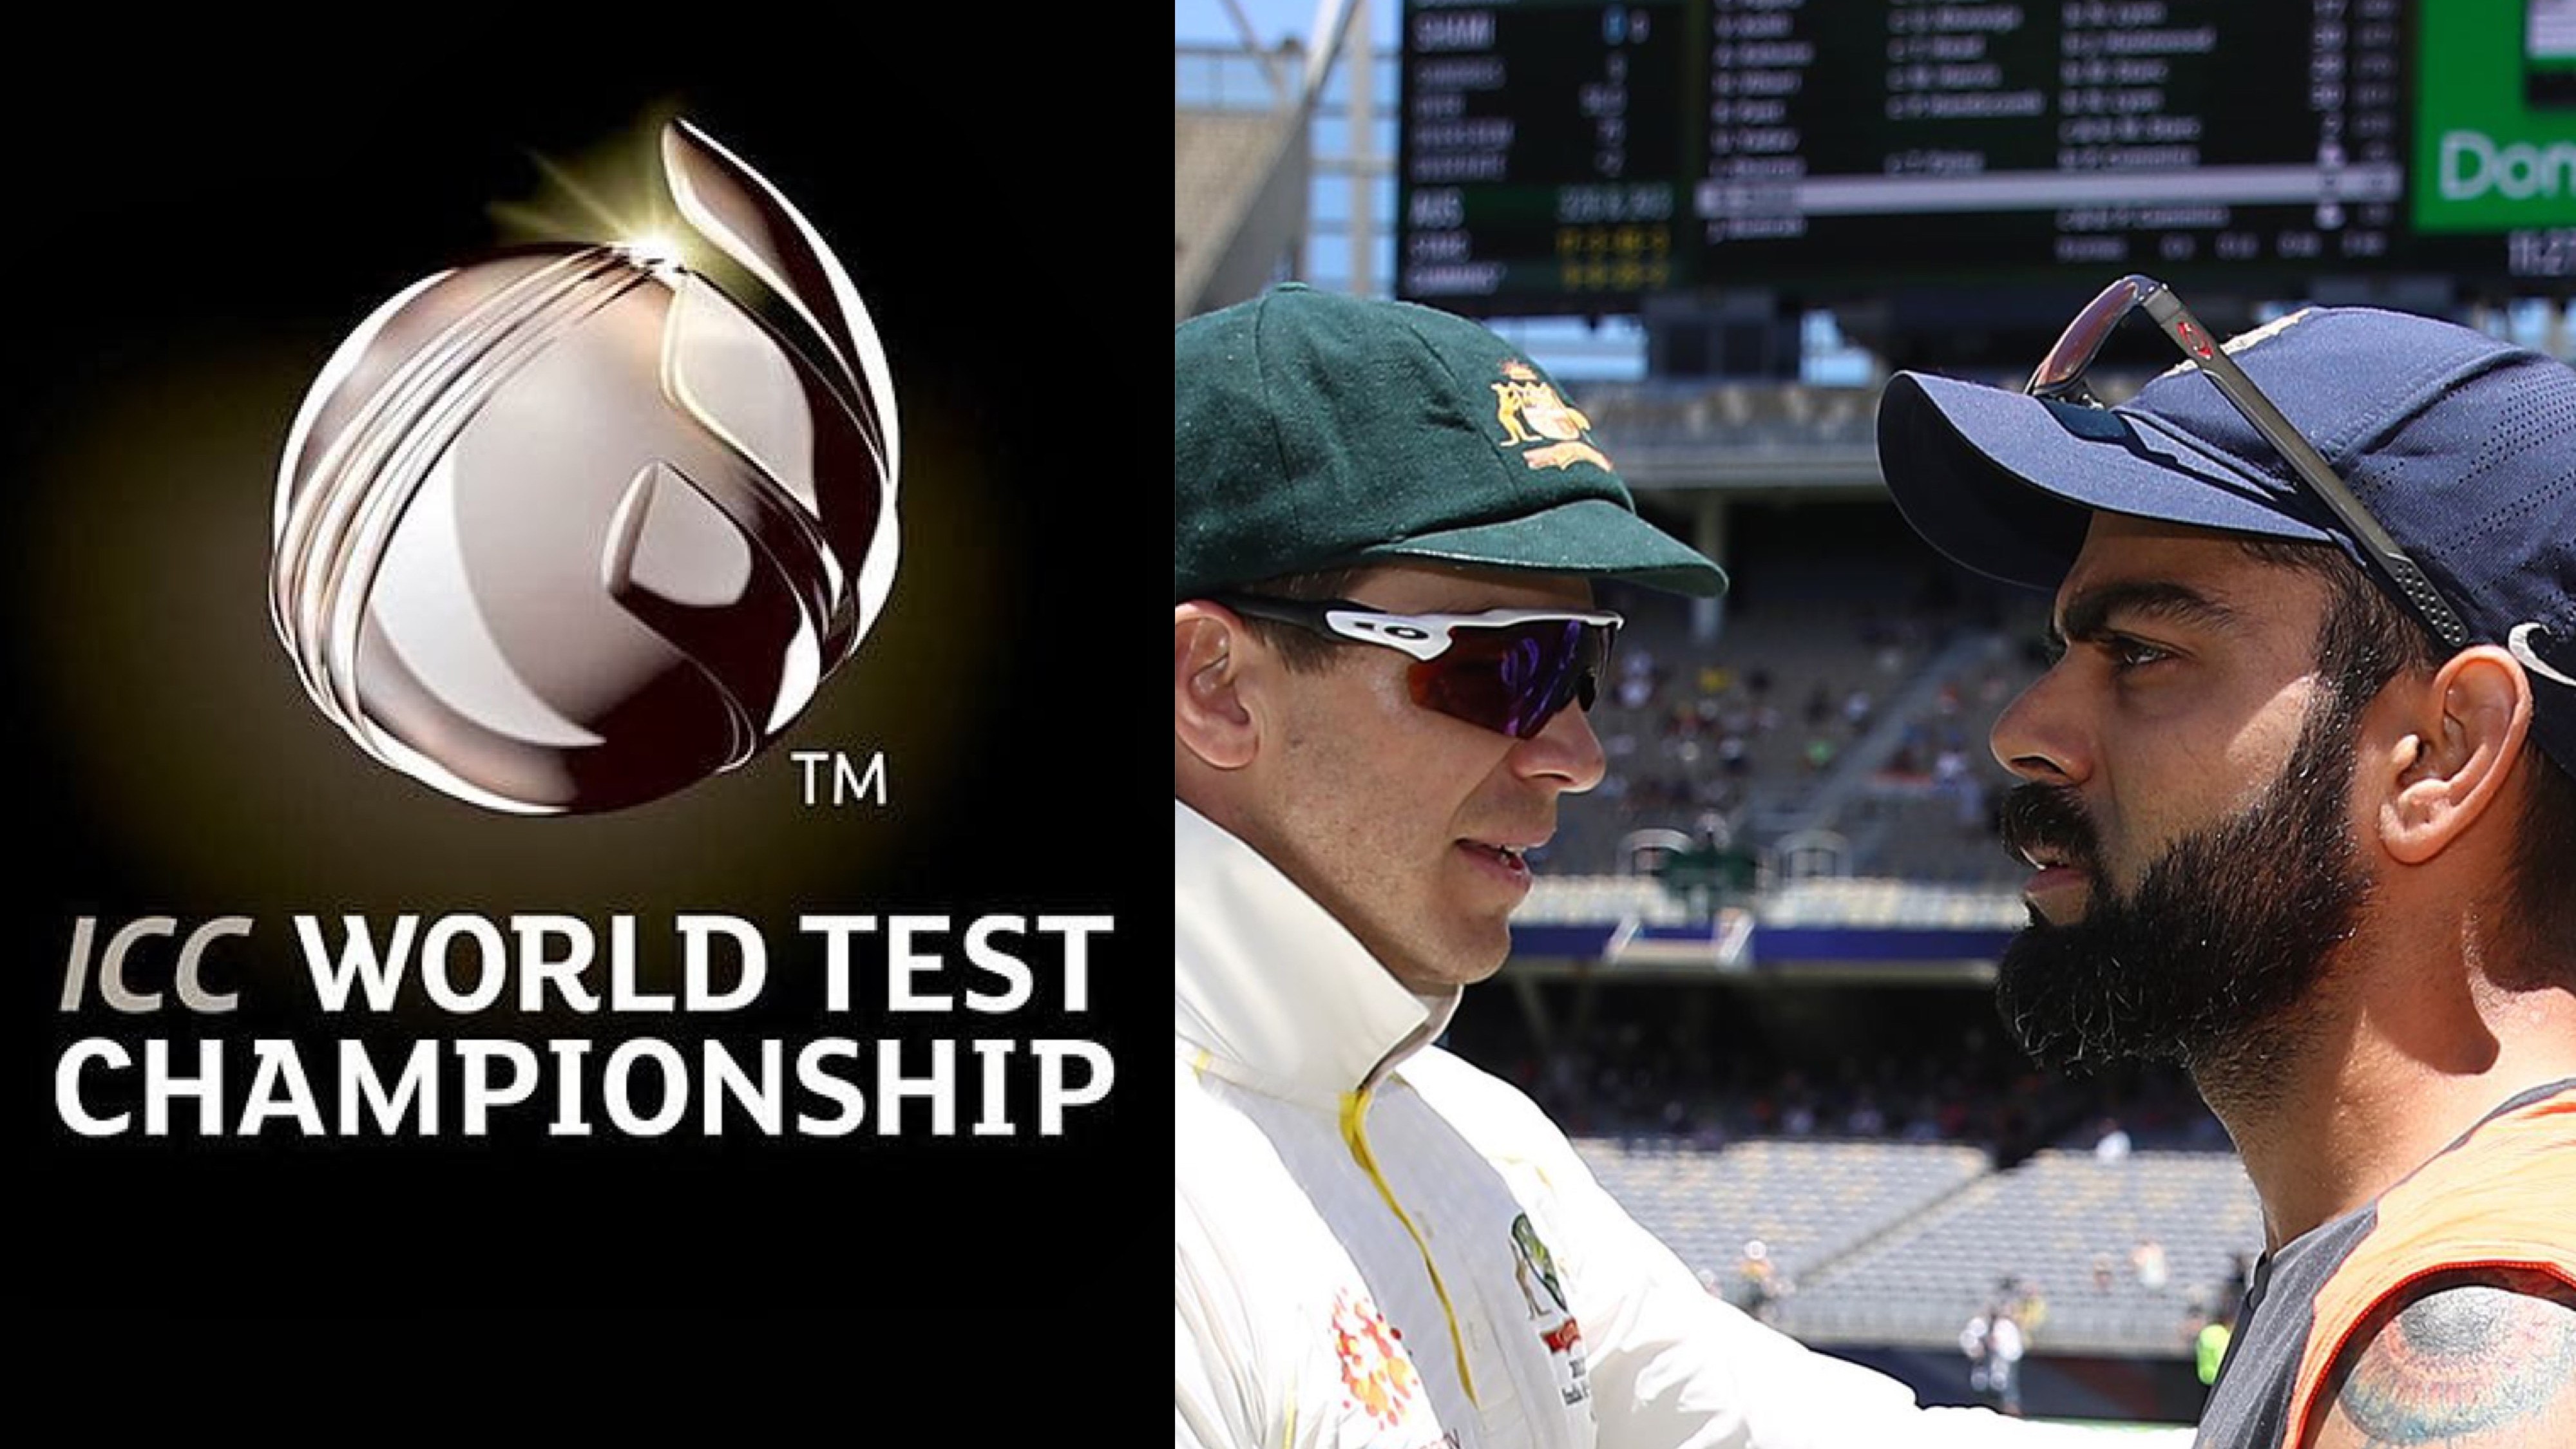 Australia leapfrogs India after ICC changes points system for World Test Championship